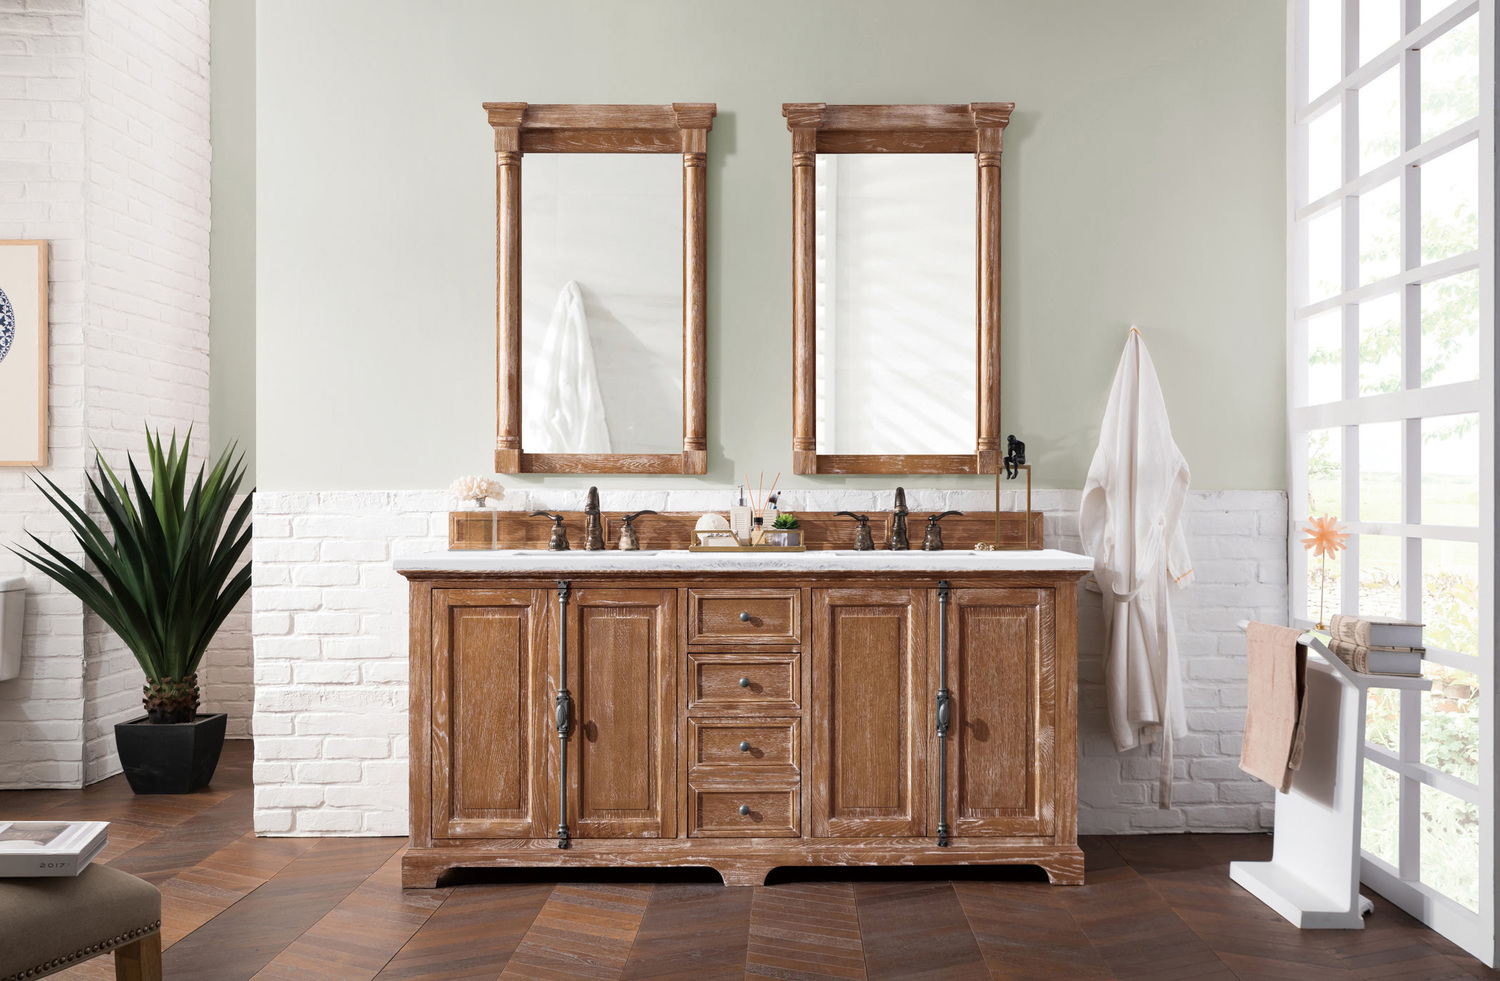 vanity cabinets with tops James Martin Vanity Driftwood Transitional